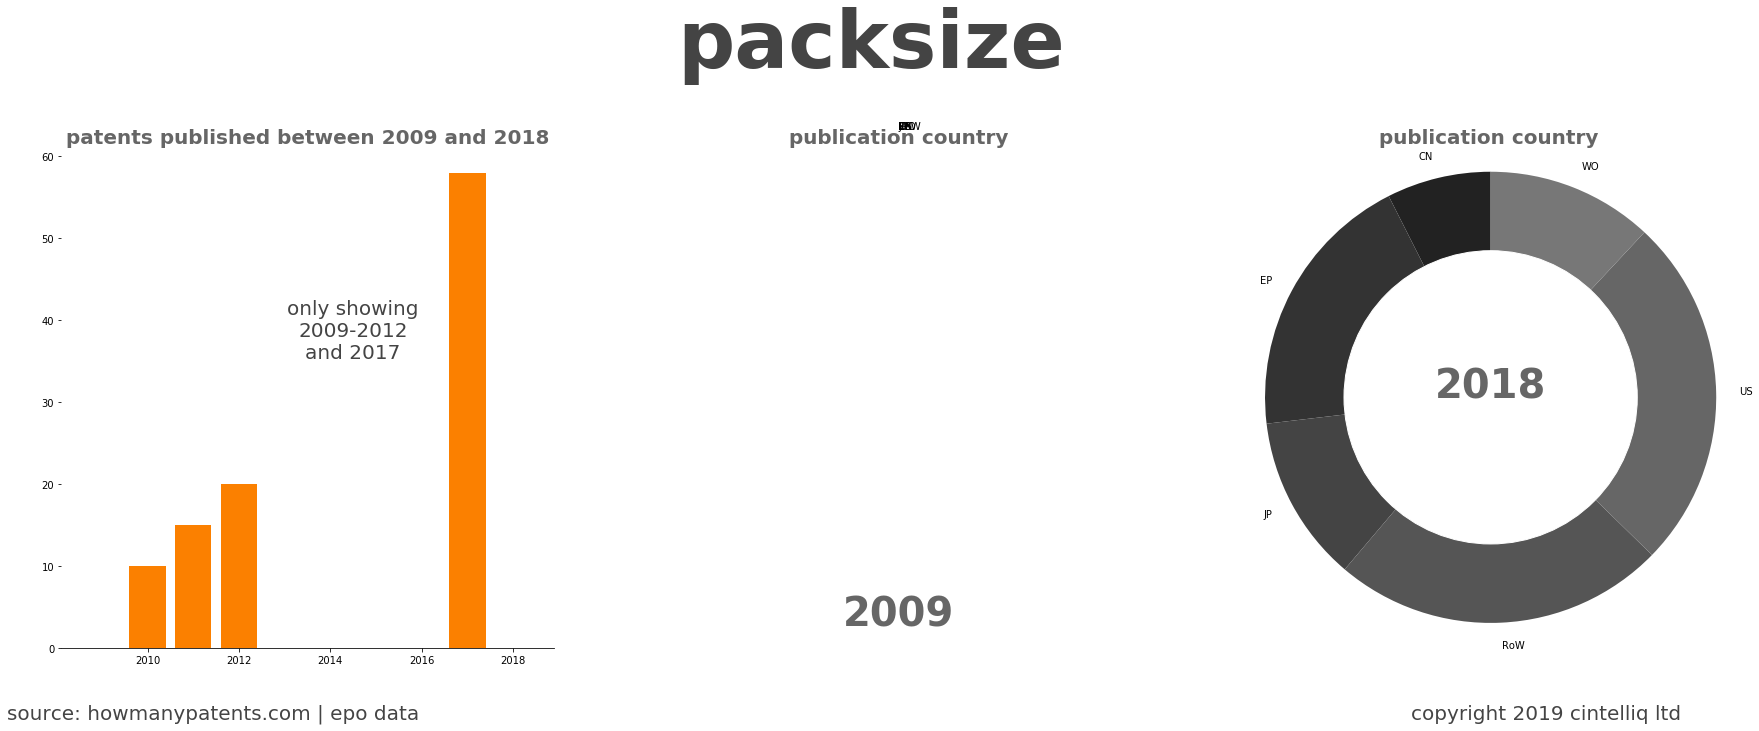 summary of patents for Packsize